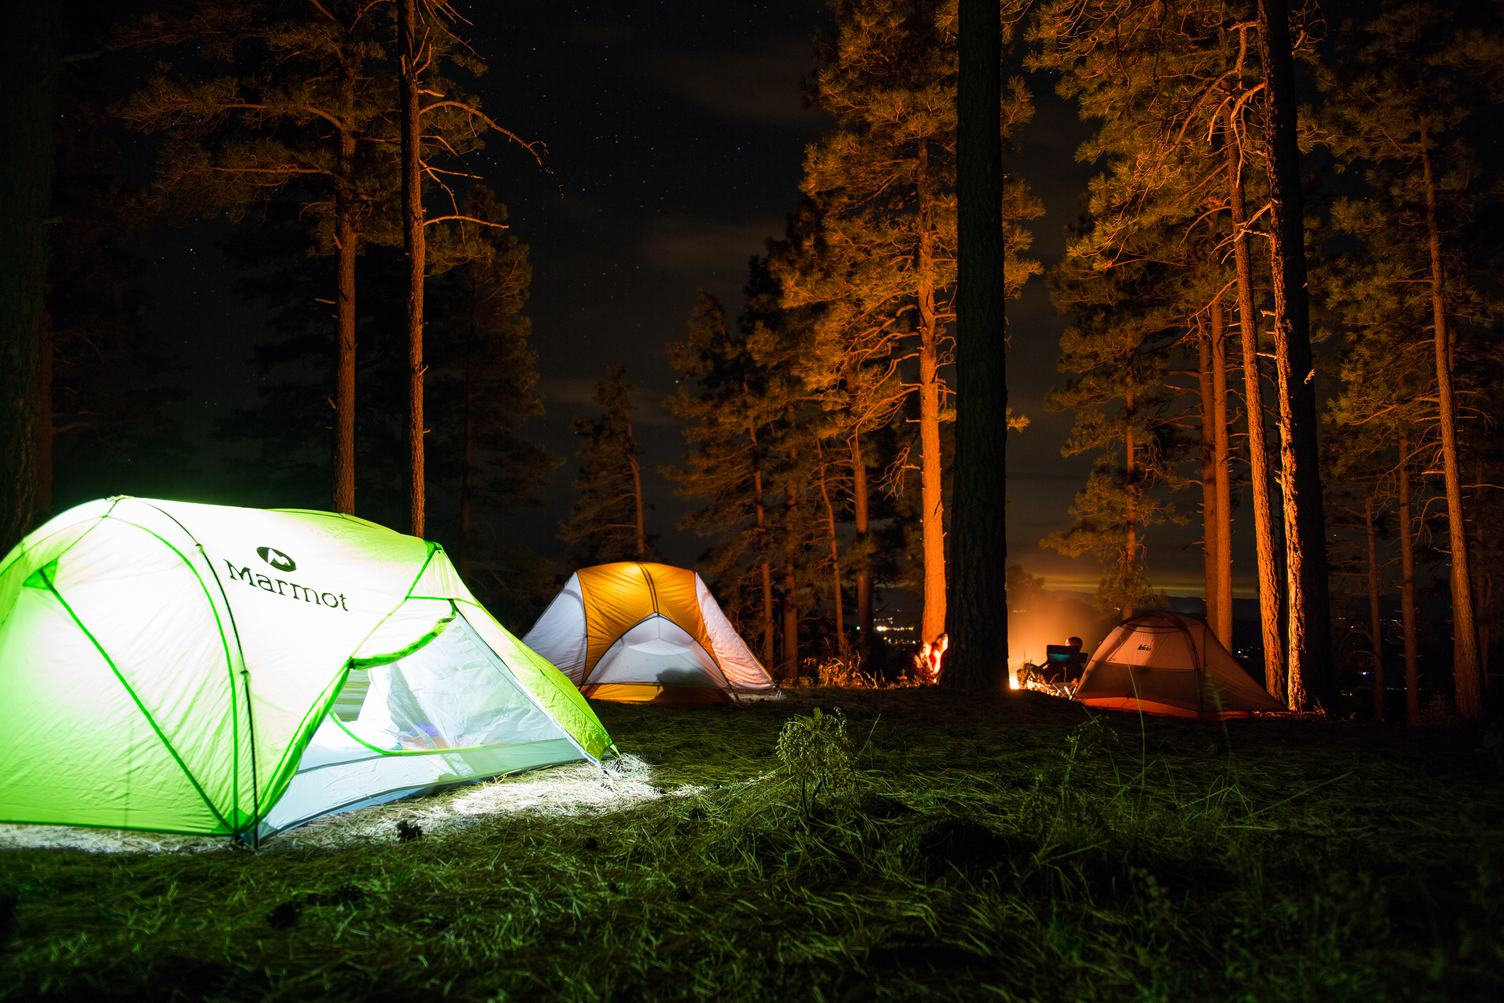 Camping in Forest with Tent Light and Bonfire